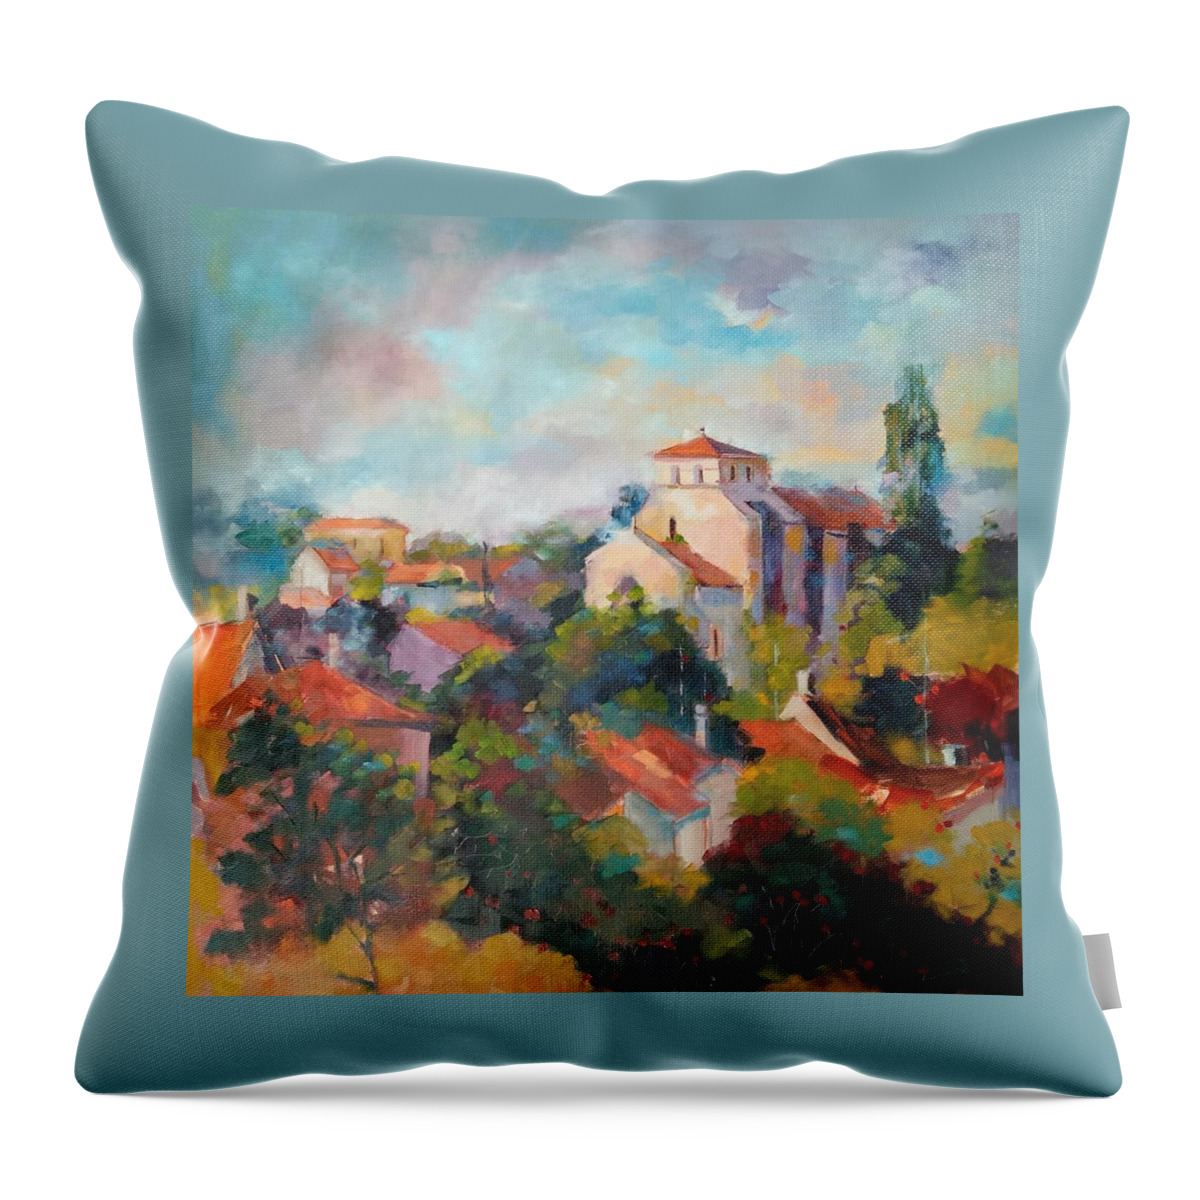  Throw Pillow featuring the painting Echallat 2019 by Kim PARDON